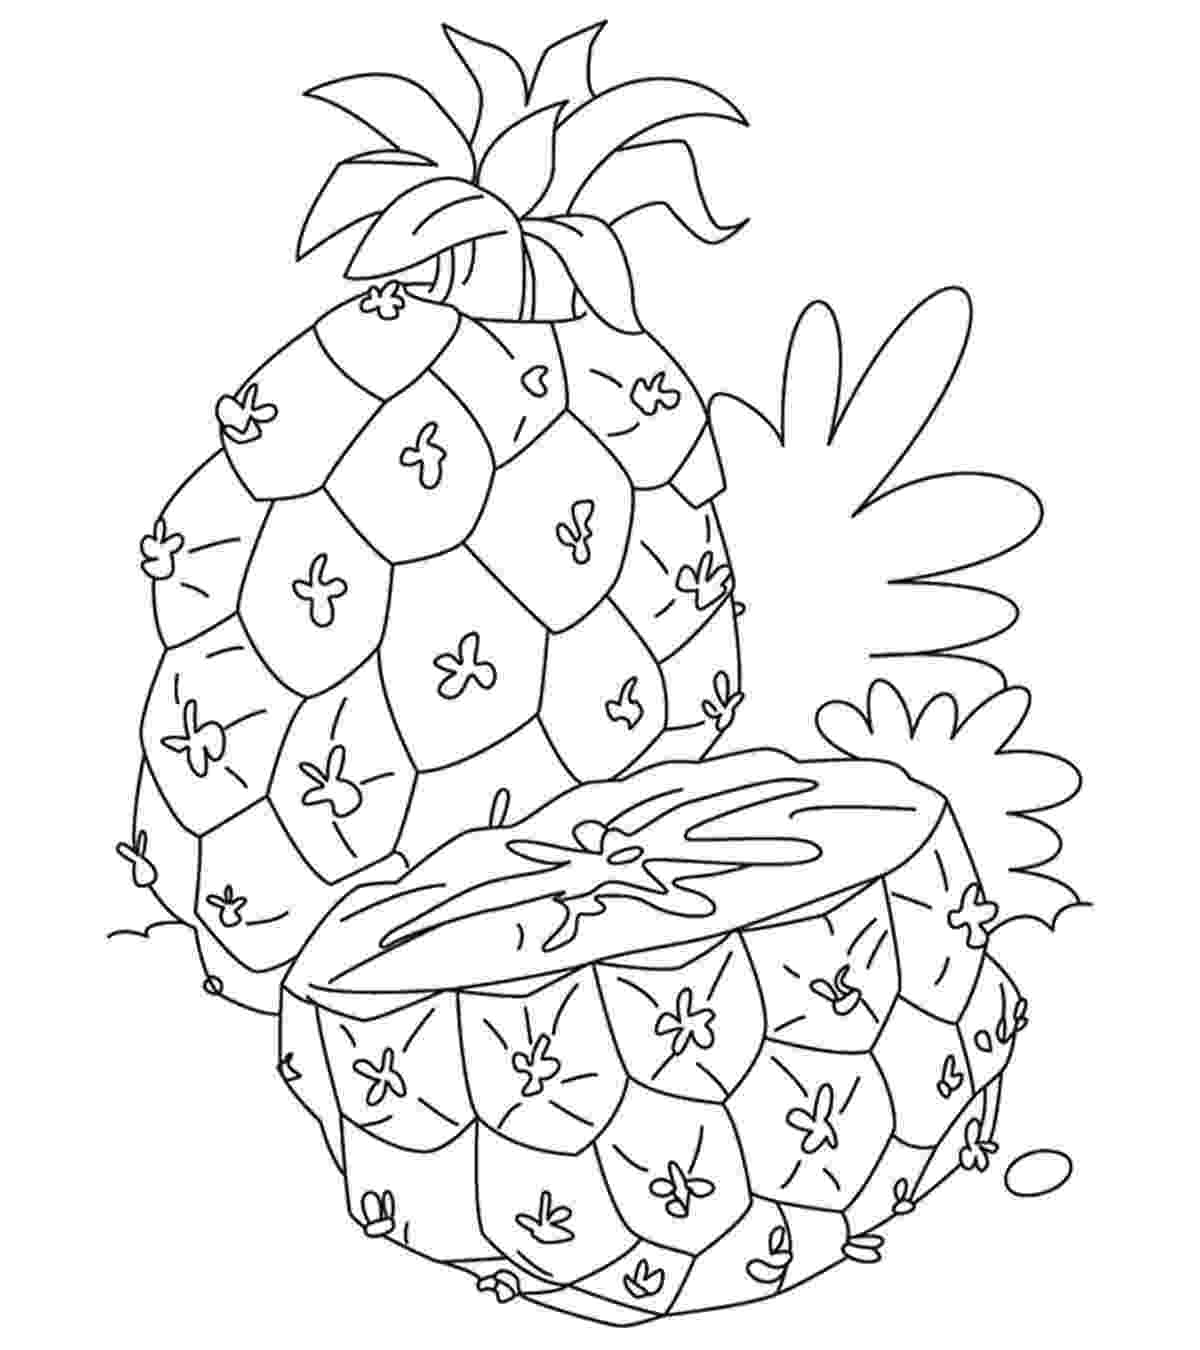 pineapple colouring picture pineapple coloring page coloring home picture pineapple colouring 